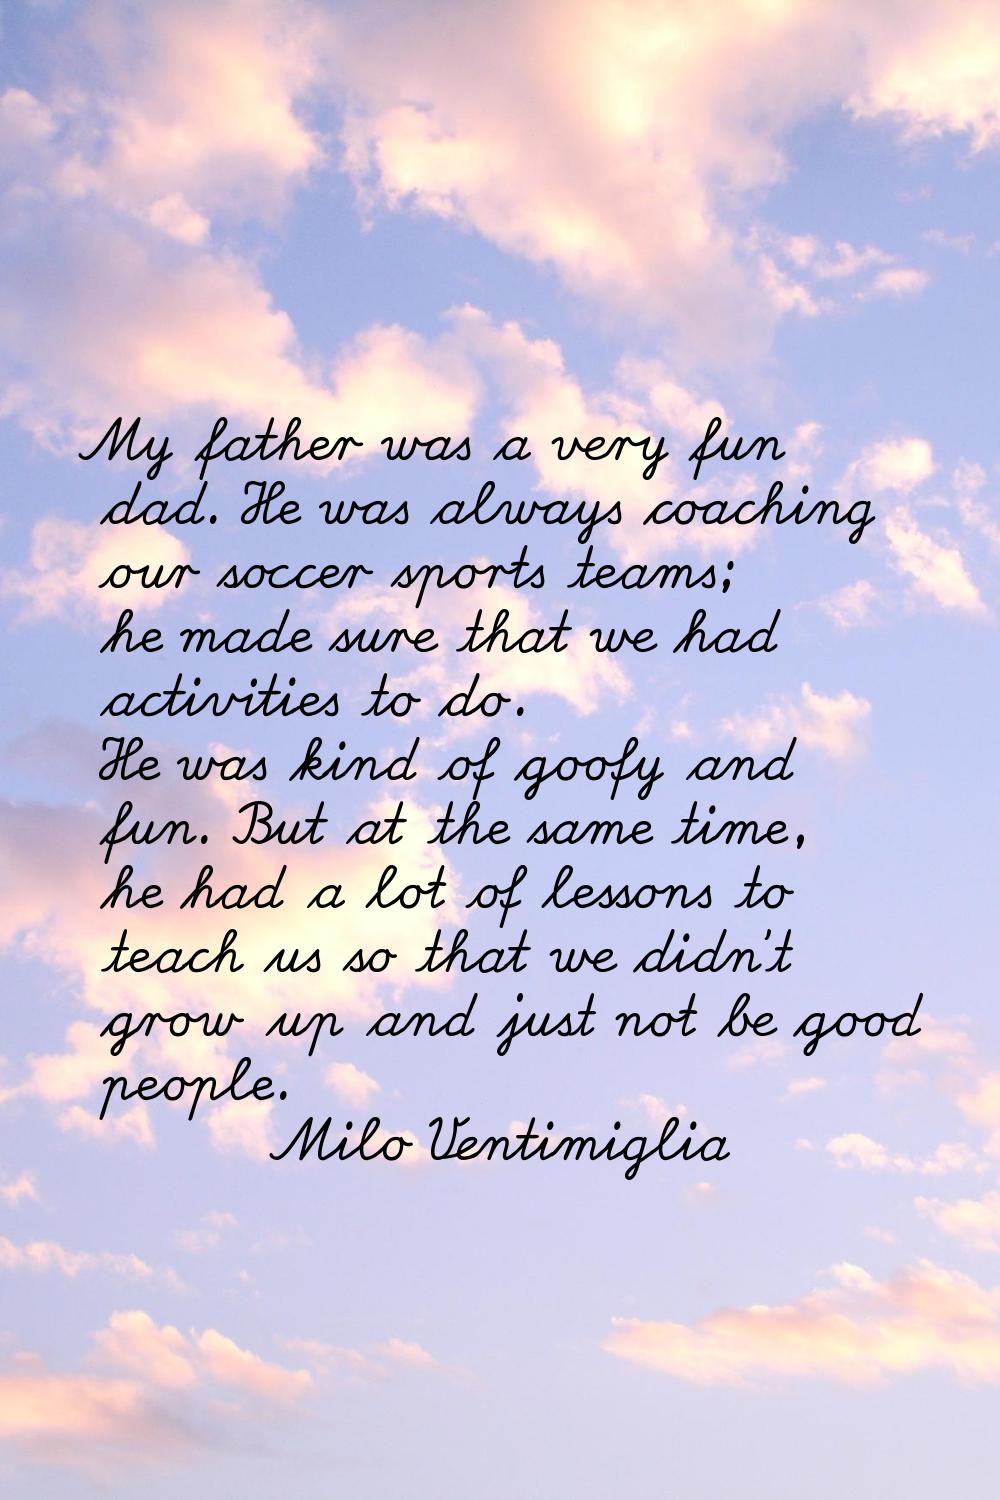 My father was a very fun dad. He was always coaching our soccer sports teams; he made sure that we 